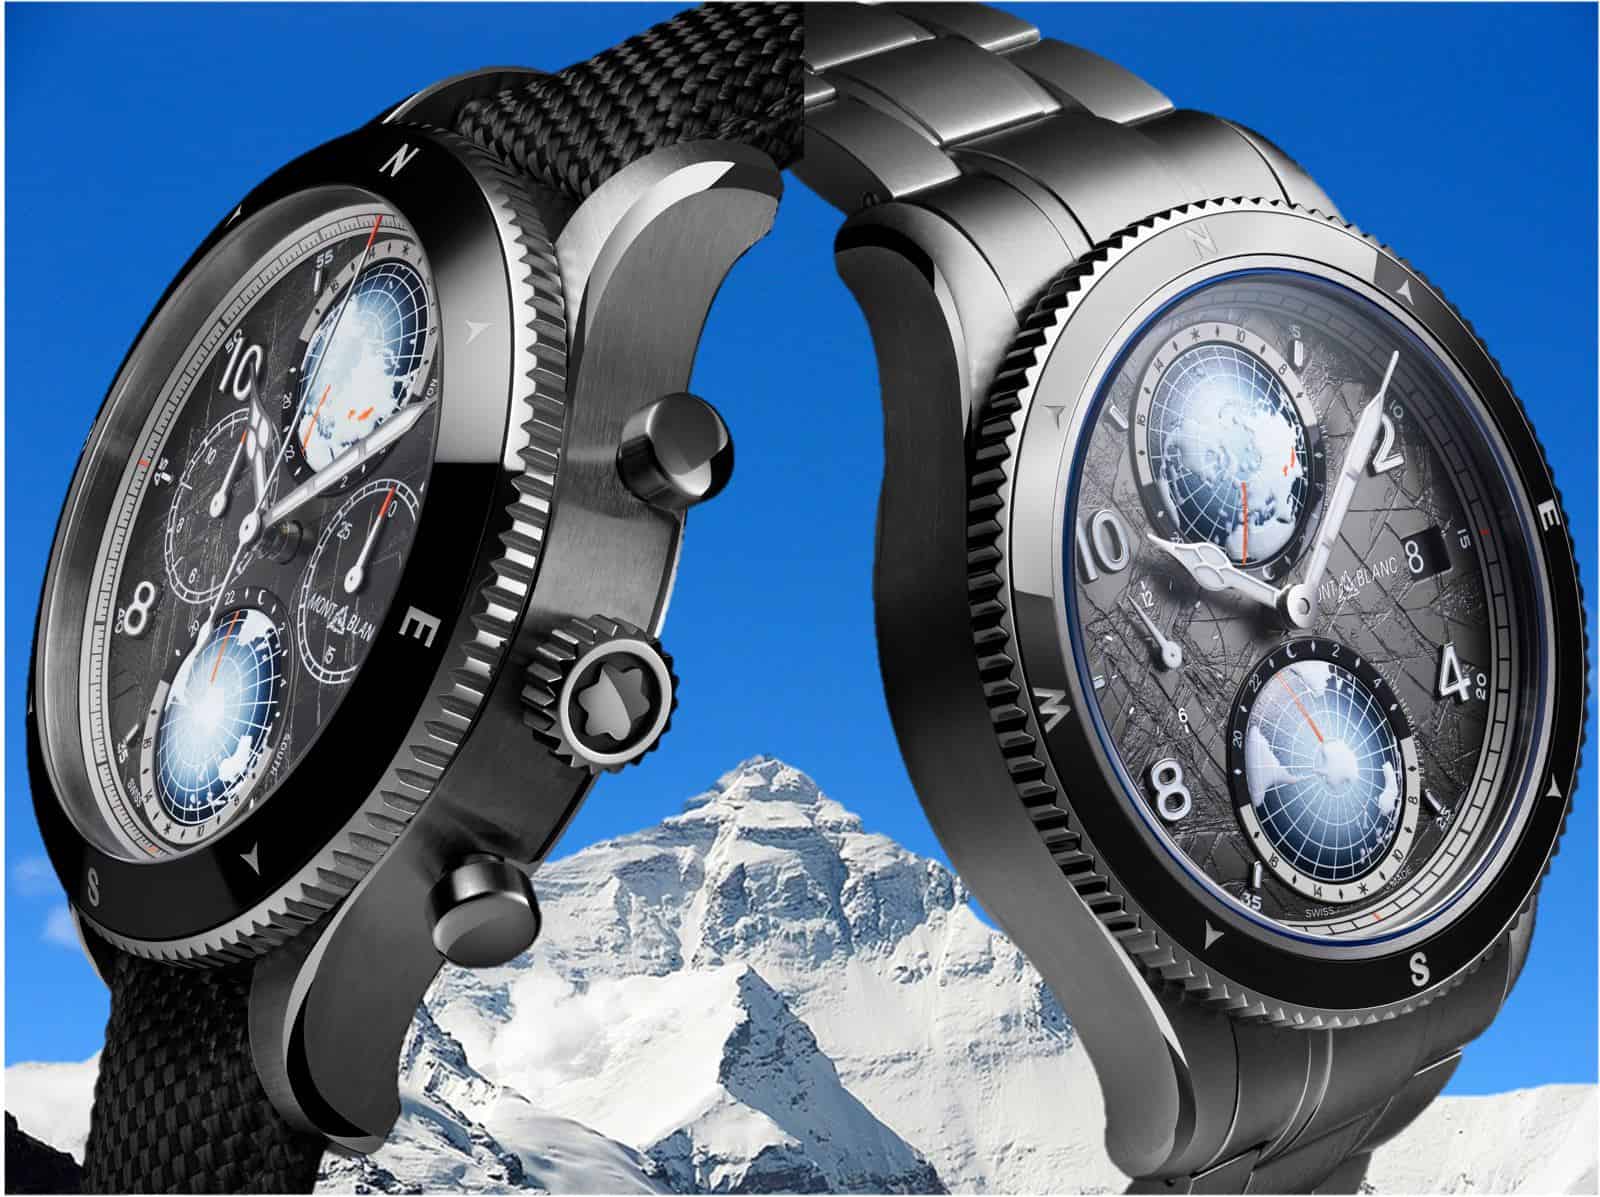 Montblanc 1858 0 Oxygen The 8000 Geosphere Chronograph and Geosphere 